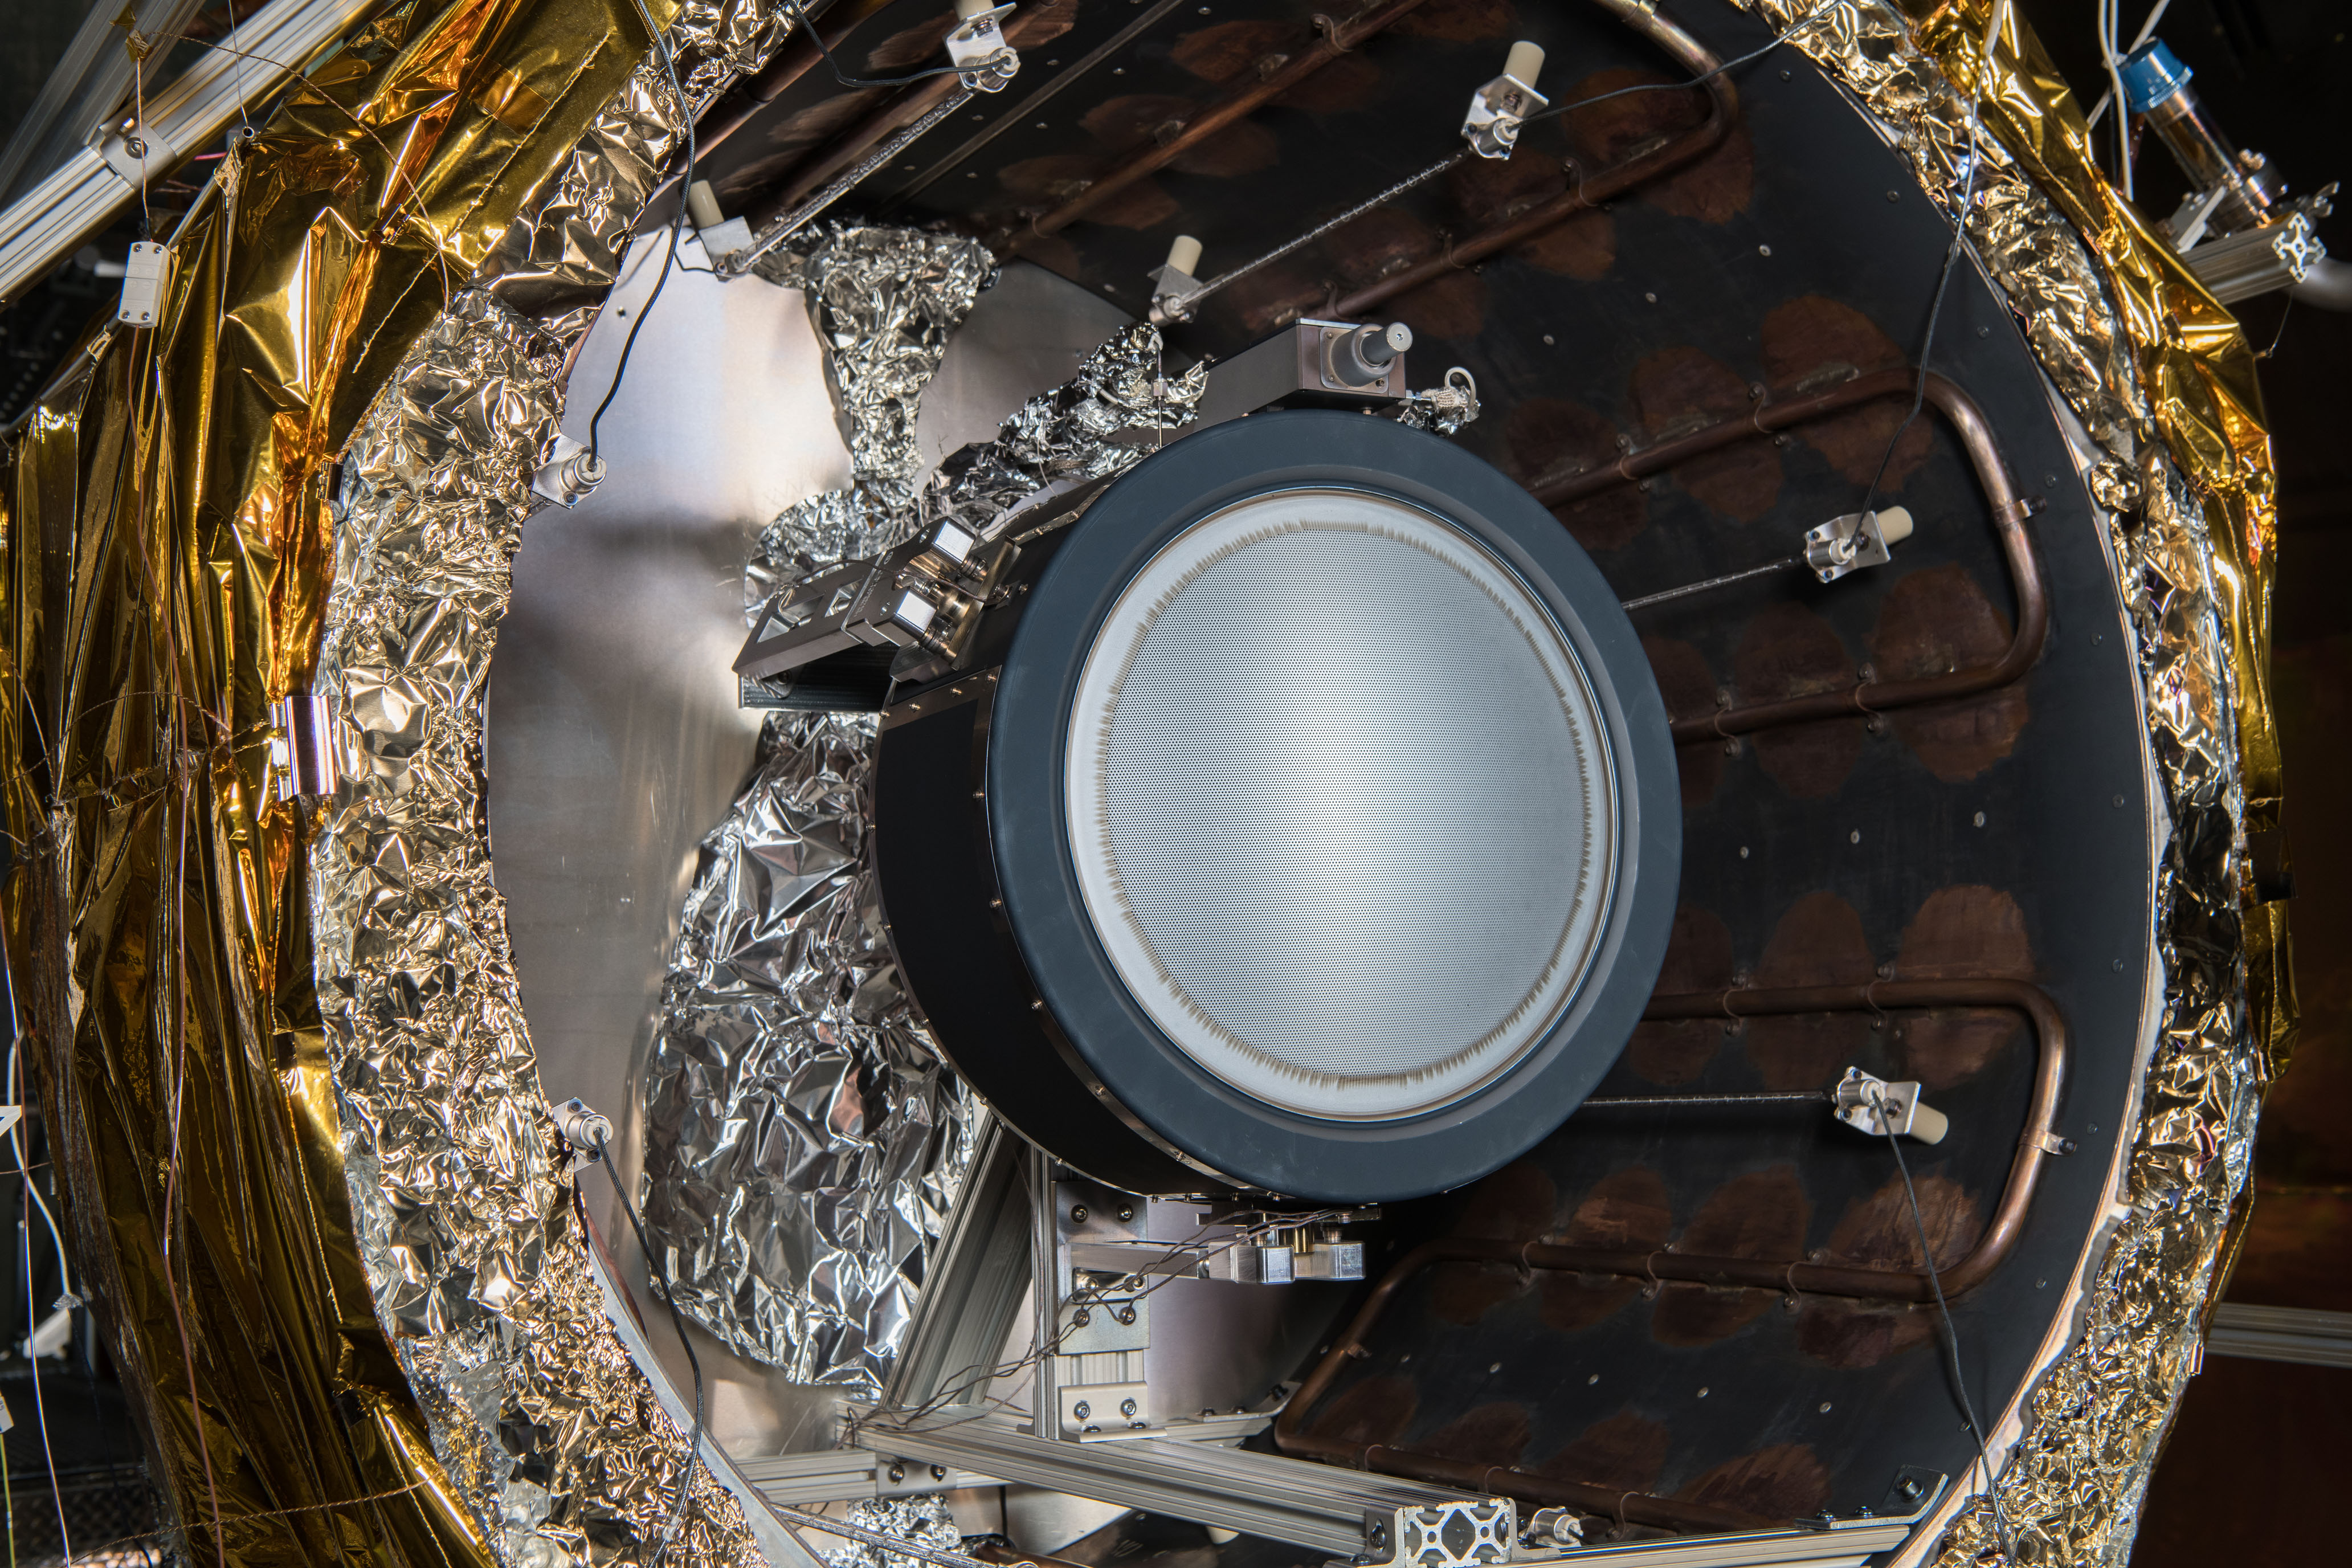 A flight-certified gridded ion thruster tested at NASA’s Glenn Research Center will be used on NASA’s Double Asteroid Redirection Test (DART), the first-ever space mission to demonstrate asteroid deflection by kinetic impact.